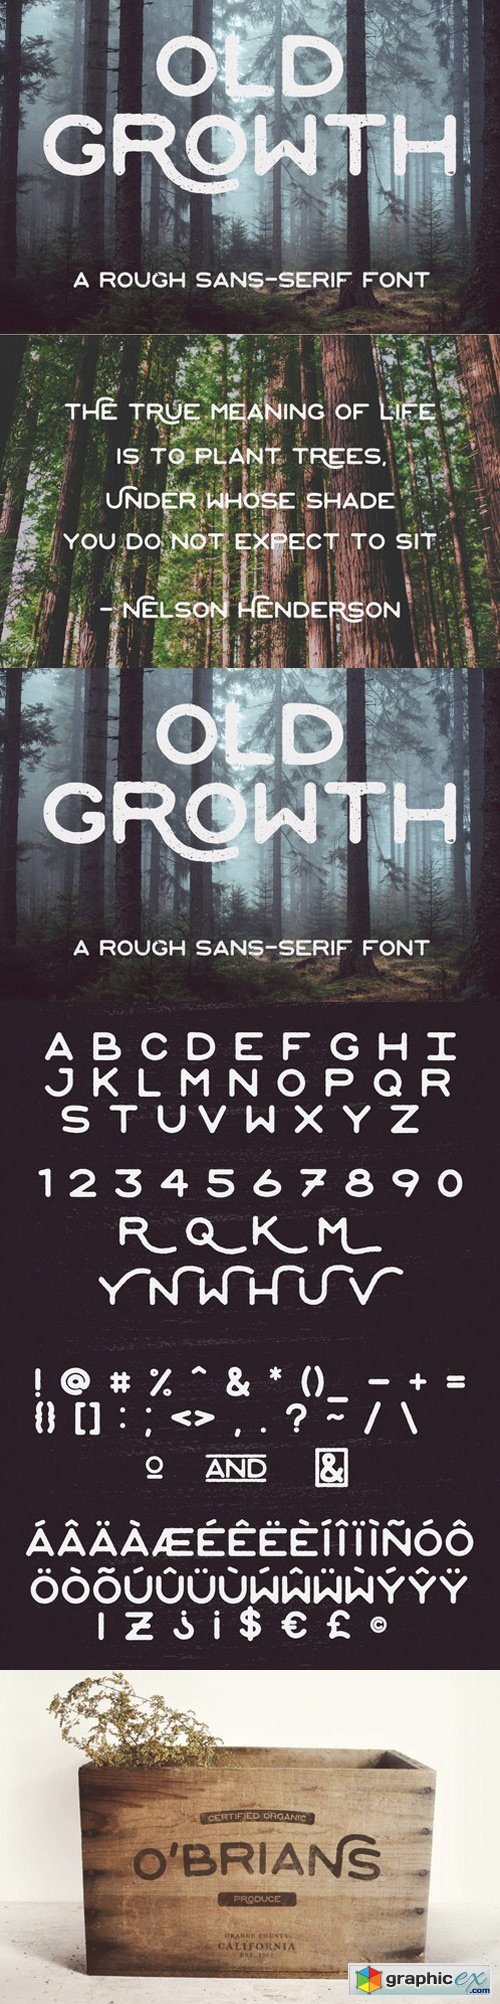 Old Growth font